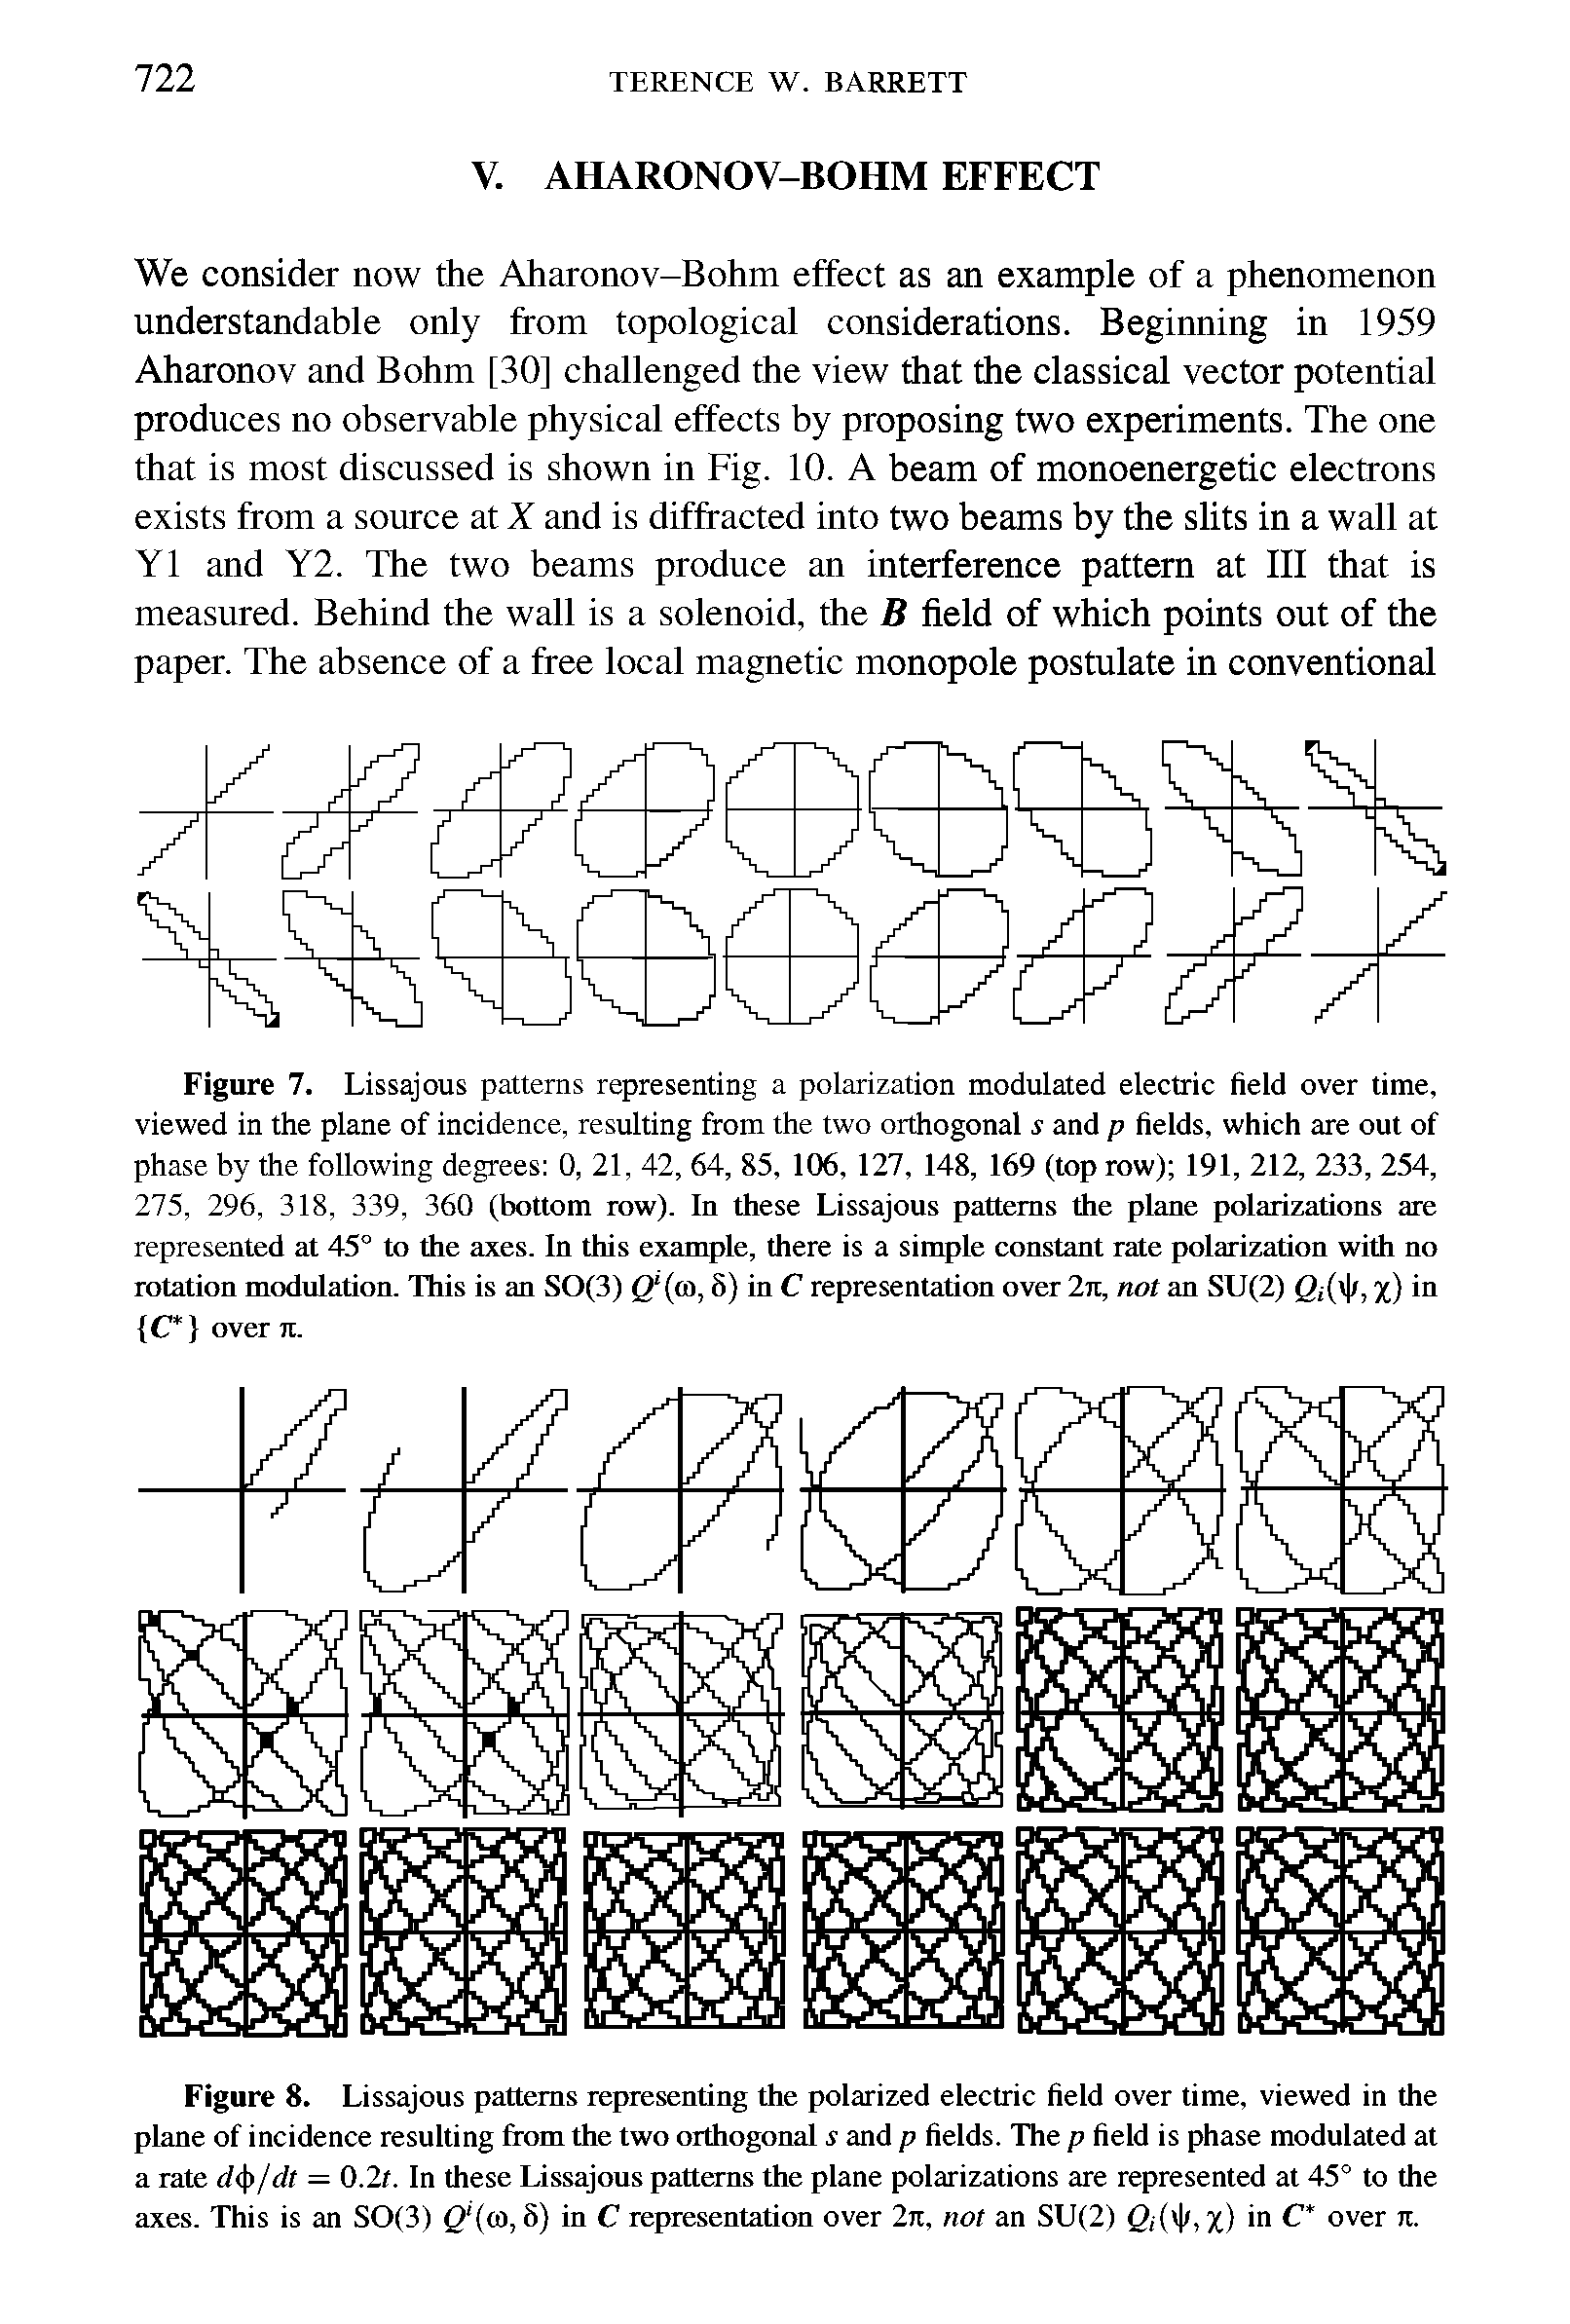 Figure 7. Lissajous patterns representing a polarization modulated electric field over time, viewed in the plane of incidence, resulting from the two orthogonal s and p fields, which are out of phase by the following degrees 0, 21, 42, 64, 85, 106, 127, 148, 169 (top row) 191, 212, 233, 254, 275, 296, 318, 339, 360 (bottom row). In these Lissajous patterns the plane polarizations are represented at 45° to the axes. In this example, there is a simple constant rate polarization with no rotation modulation. This is an SO(3) Q (a>, 8) in C representation over 2n, not an SU(2) <2 (t /, %) in C over it.